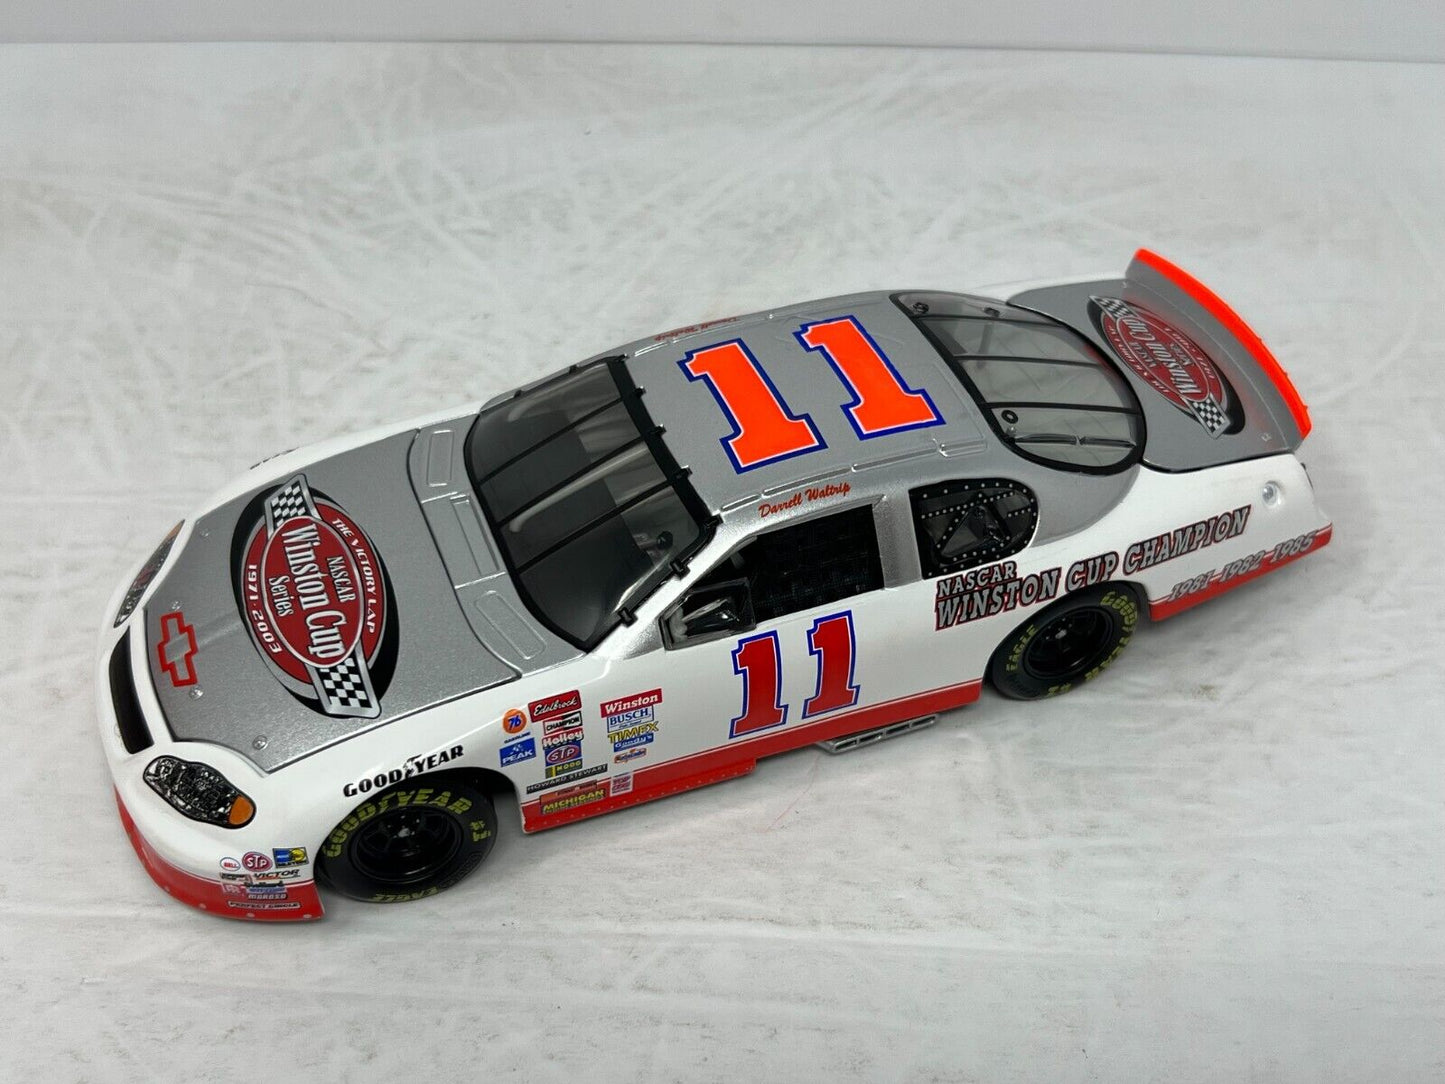 Action Nascar Darrell Waltrip Victory Lap 3x Champion GM Dealers 1:24 Diecast